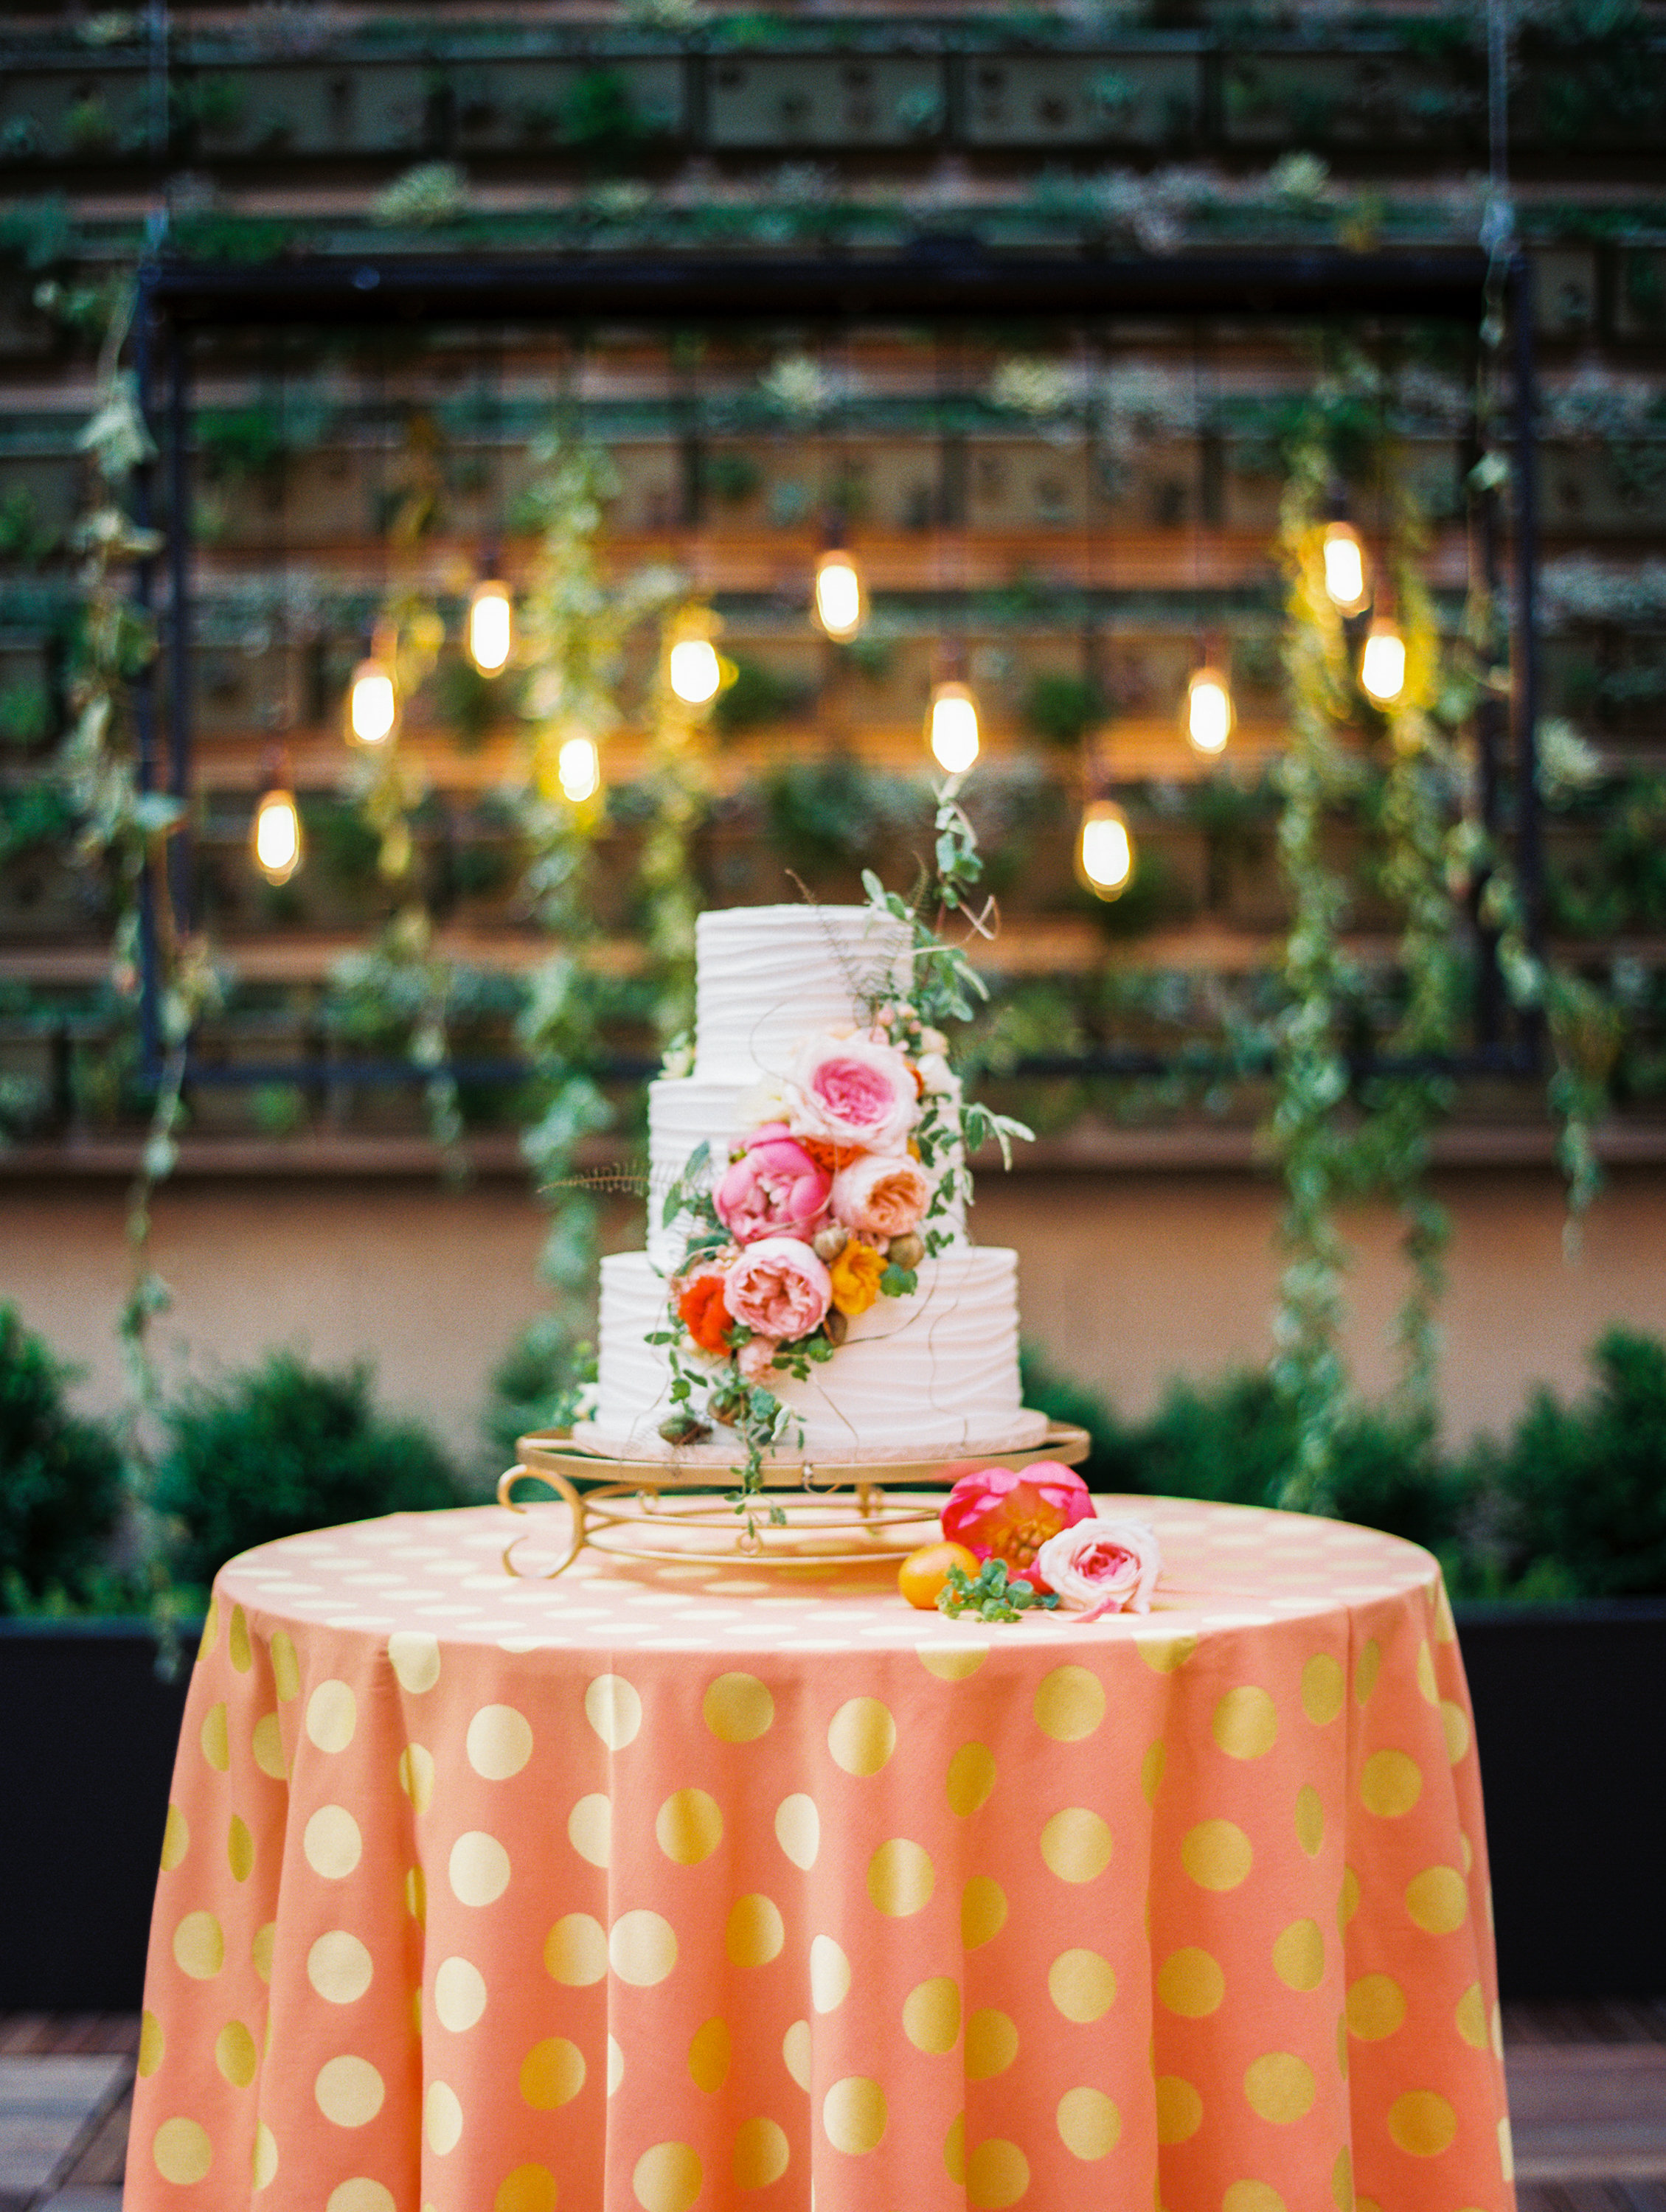 Wedding cake with roses and greenery in front of green wall with edison bulbs